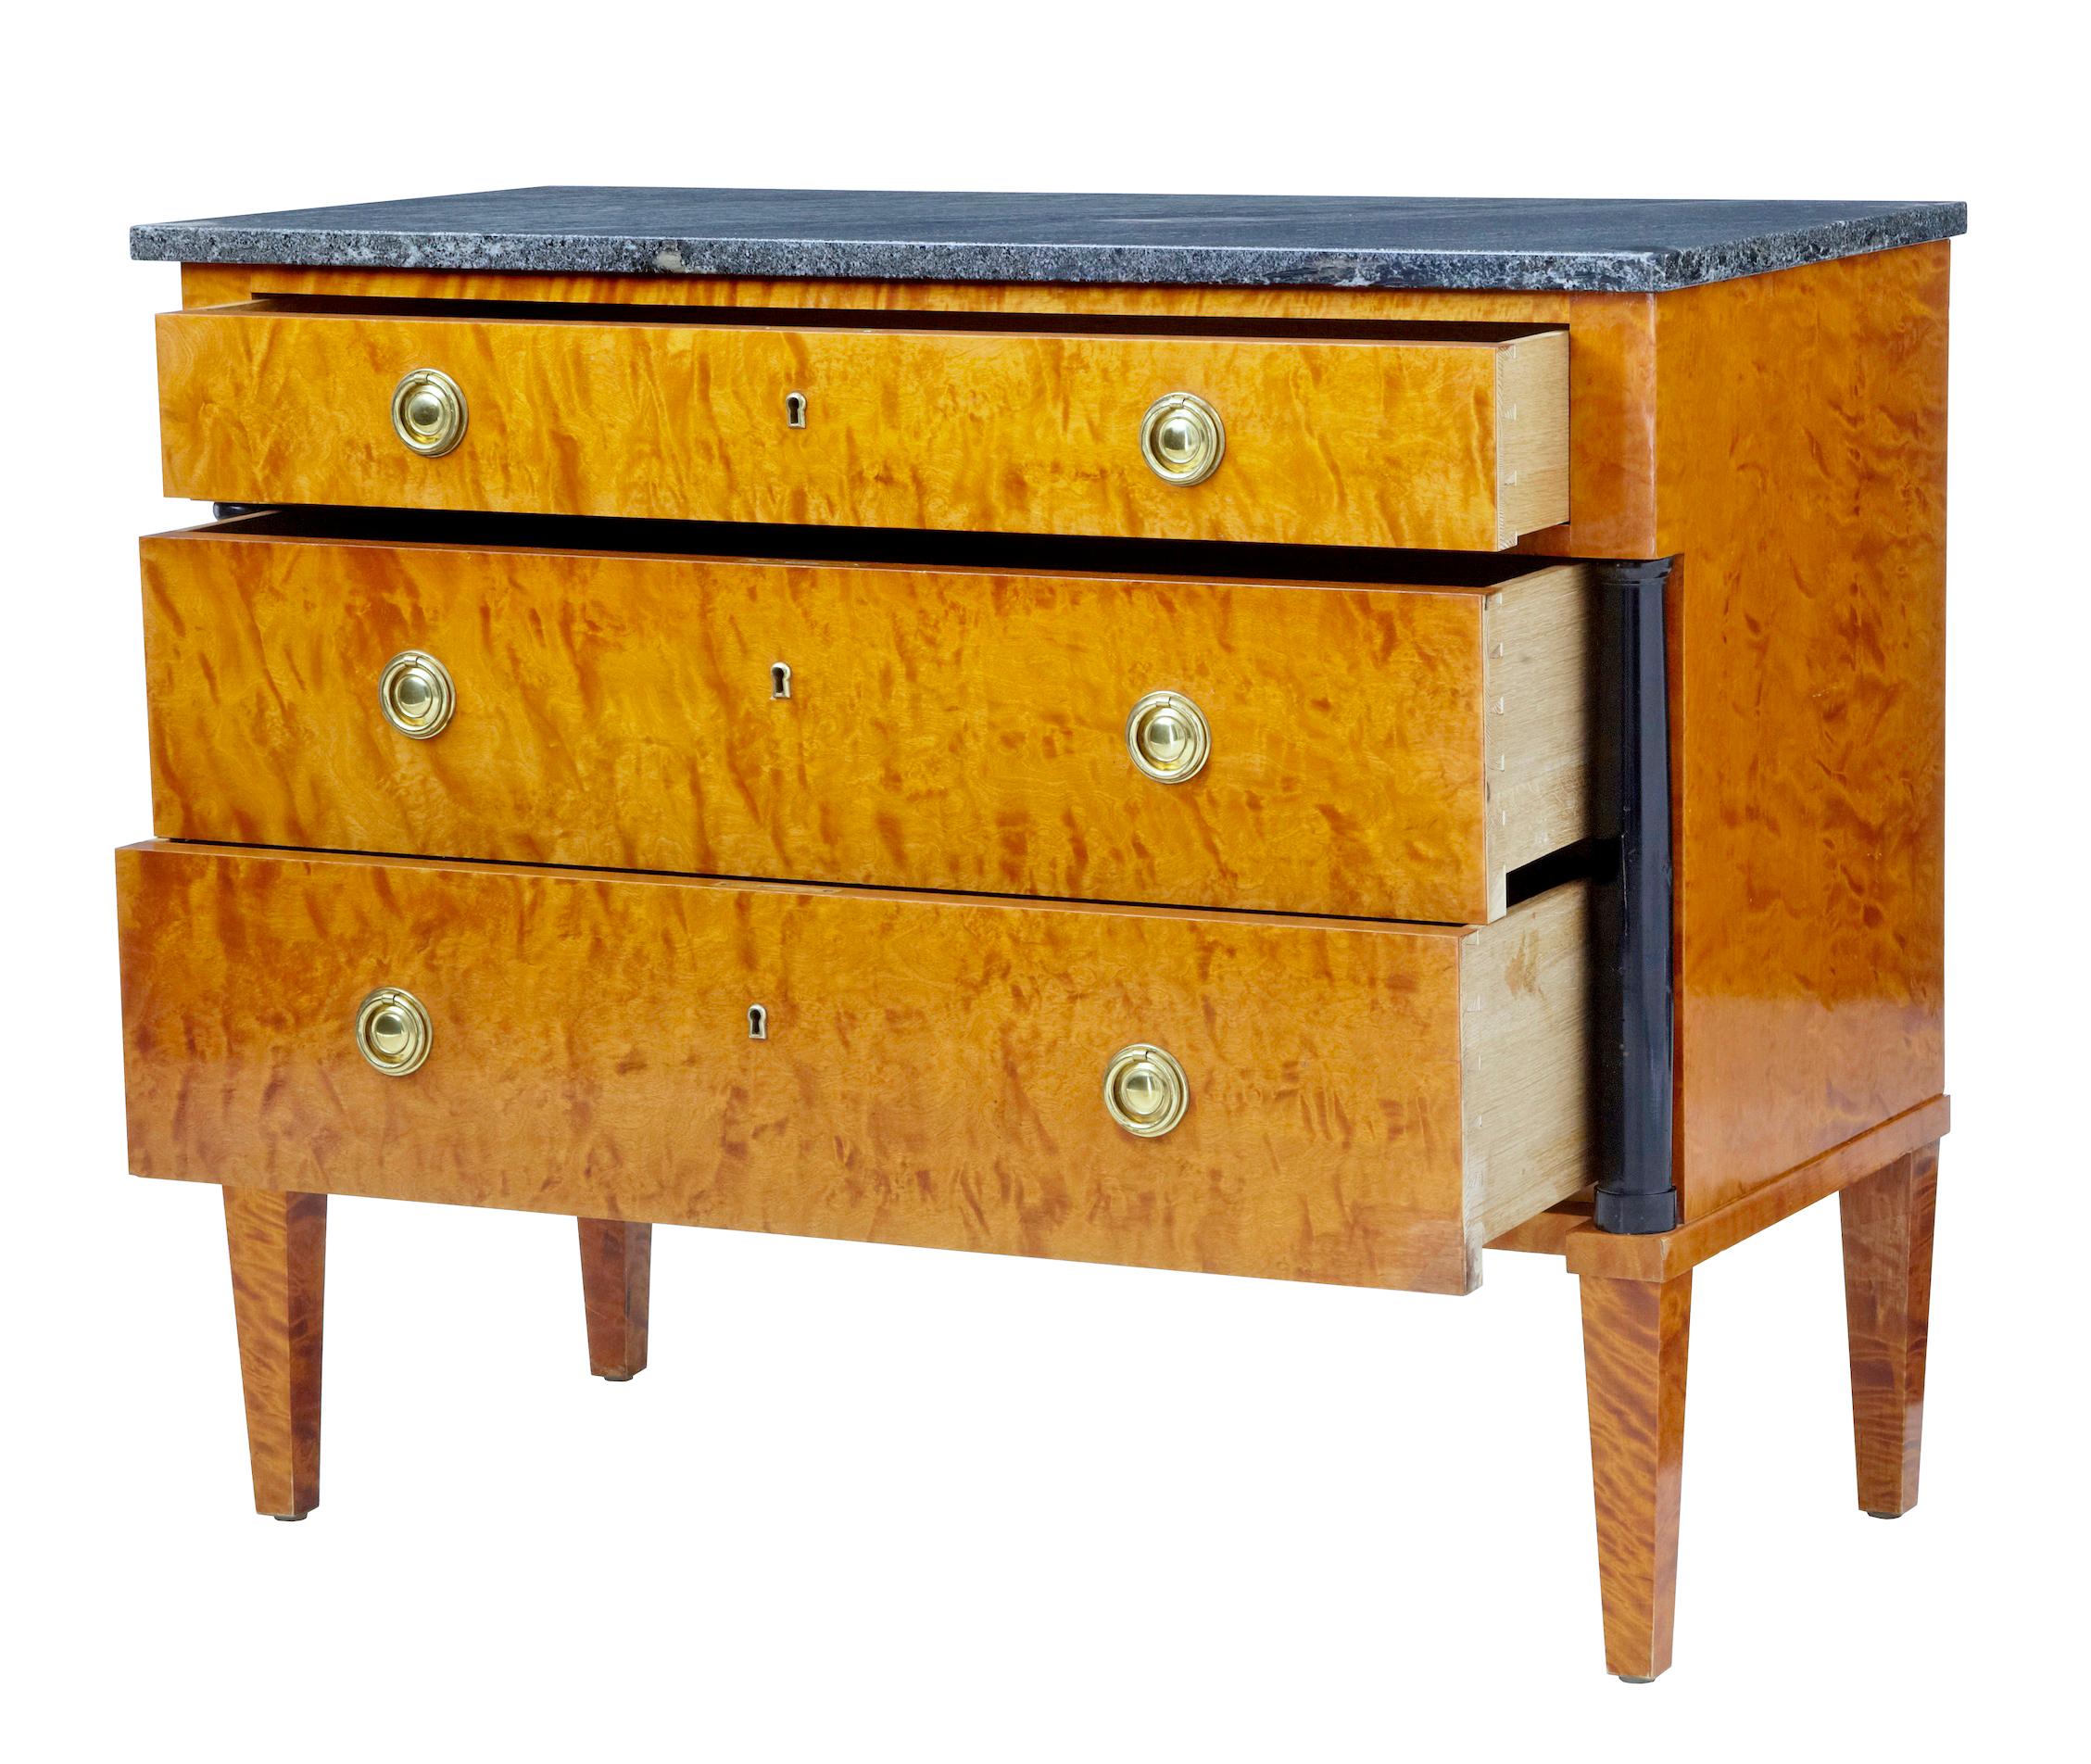 Mid-20th century golden birch marble-top chest of drawers, circa 1940.

Over sailing top with loose fitting marble. Fitted with 3 drawers fitted with brass ring handles. Standing on tapered legs. Detailed with an ebonized column each